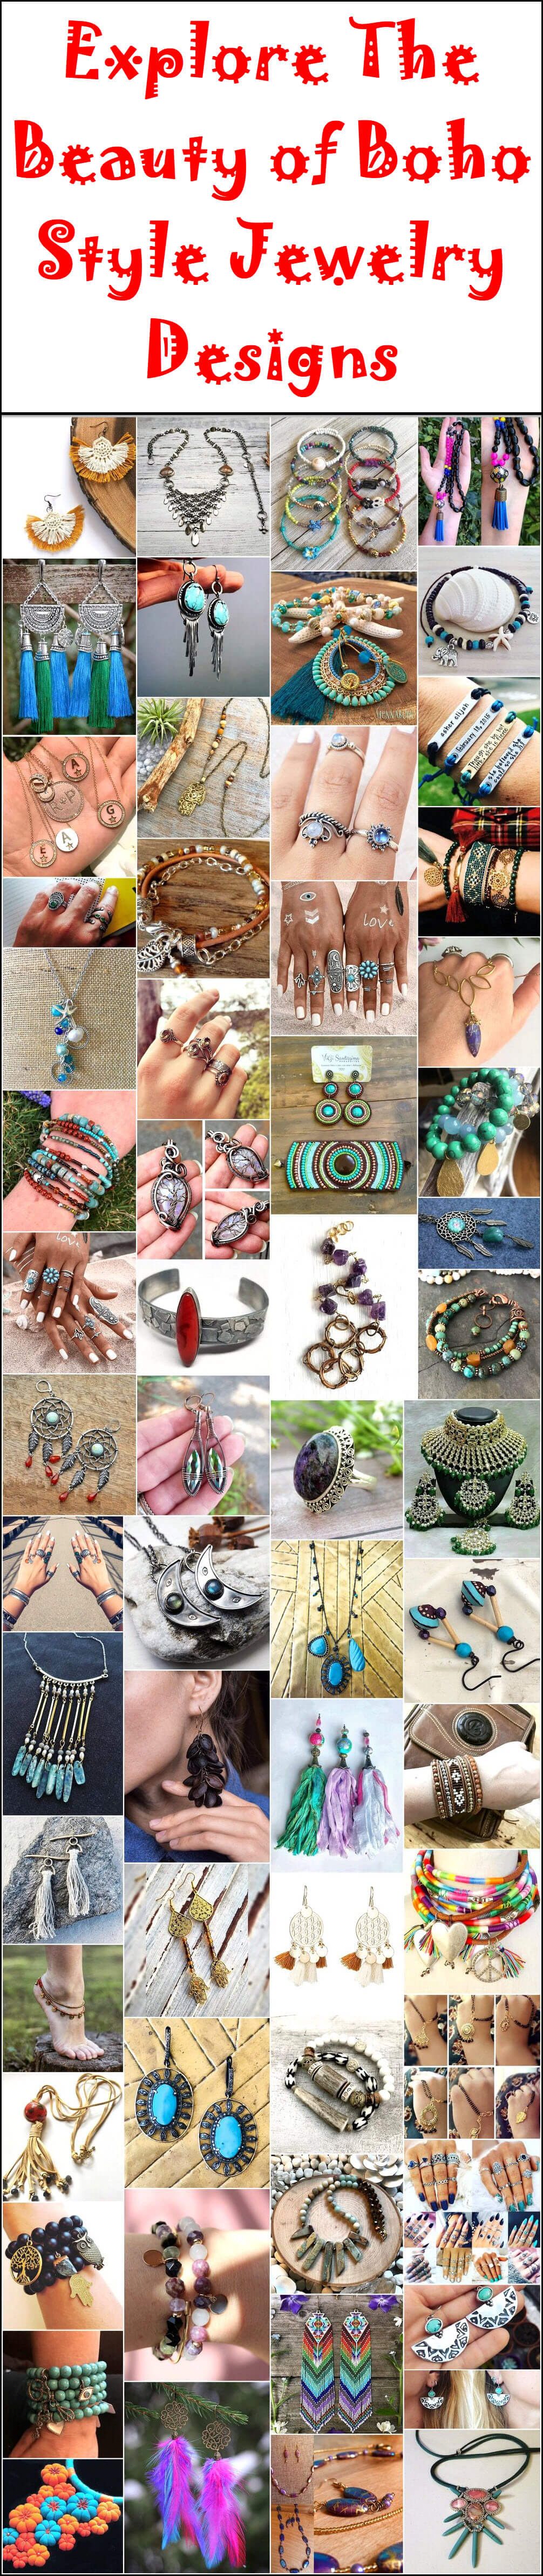 Explore The Beauty of Boho Style Jewelry Designs